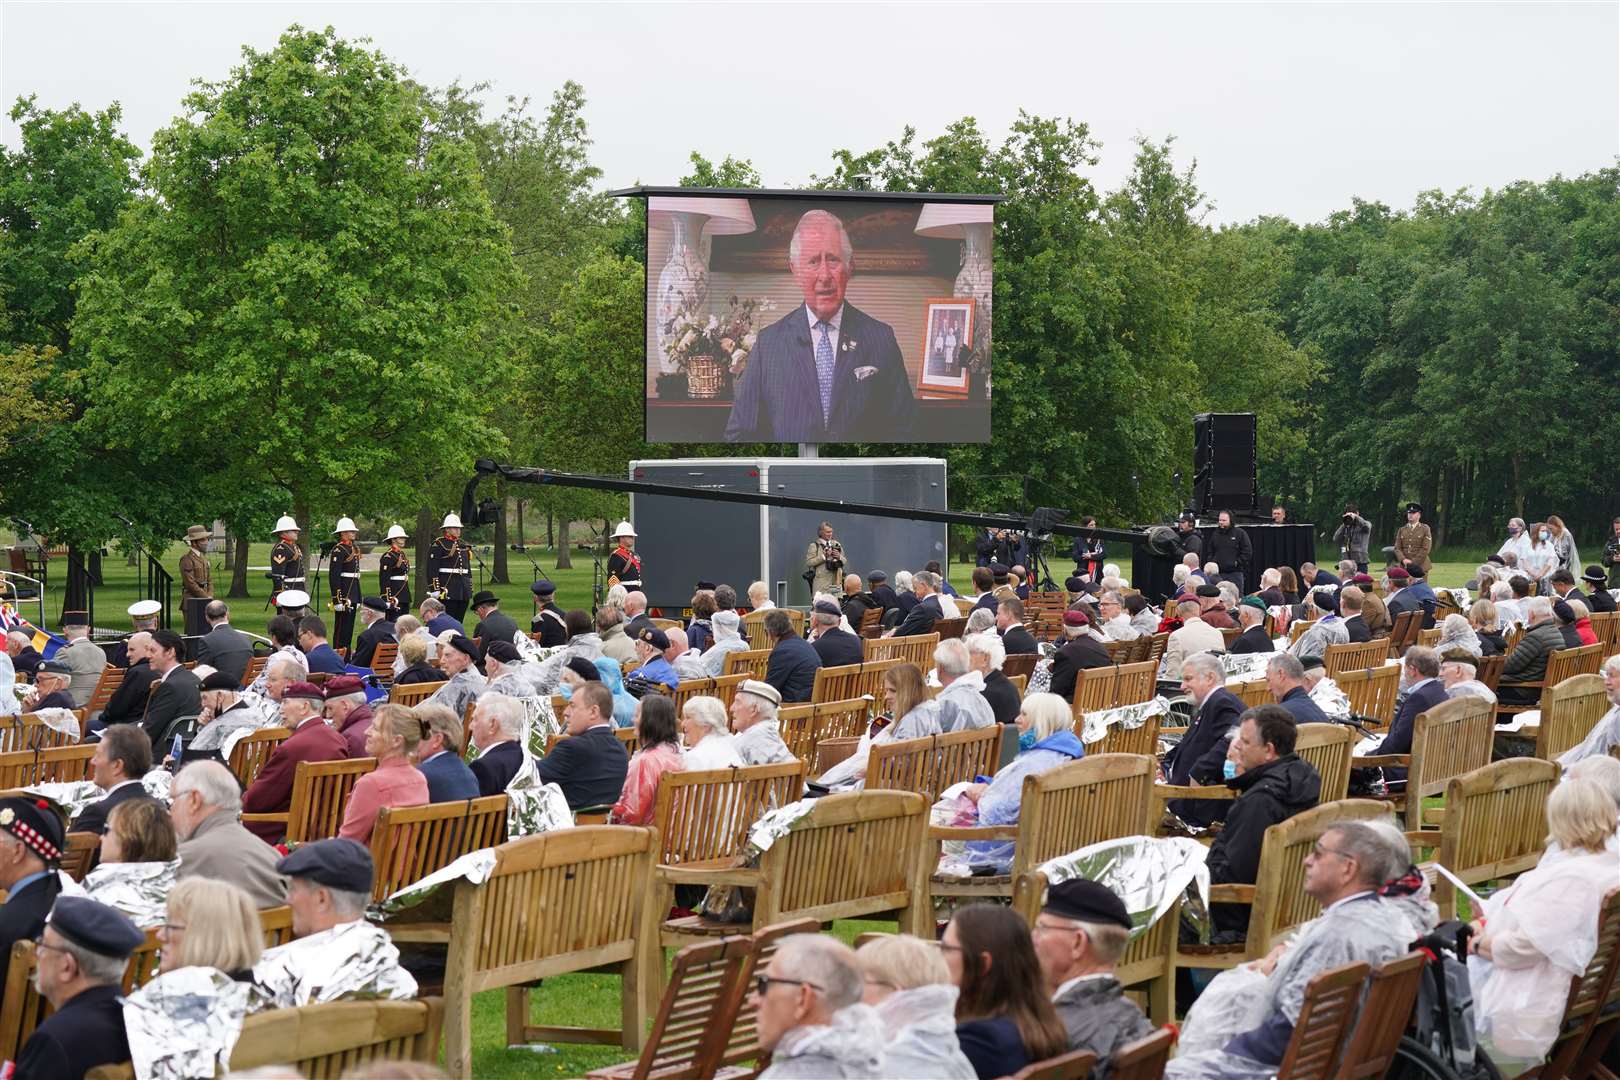 The opening was streamed live on a large screen (Jacob King/PA)